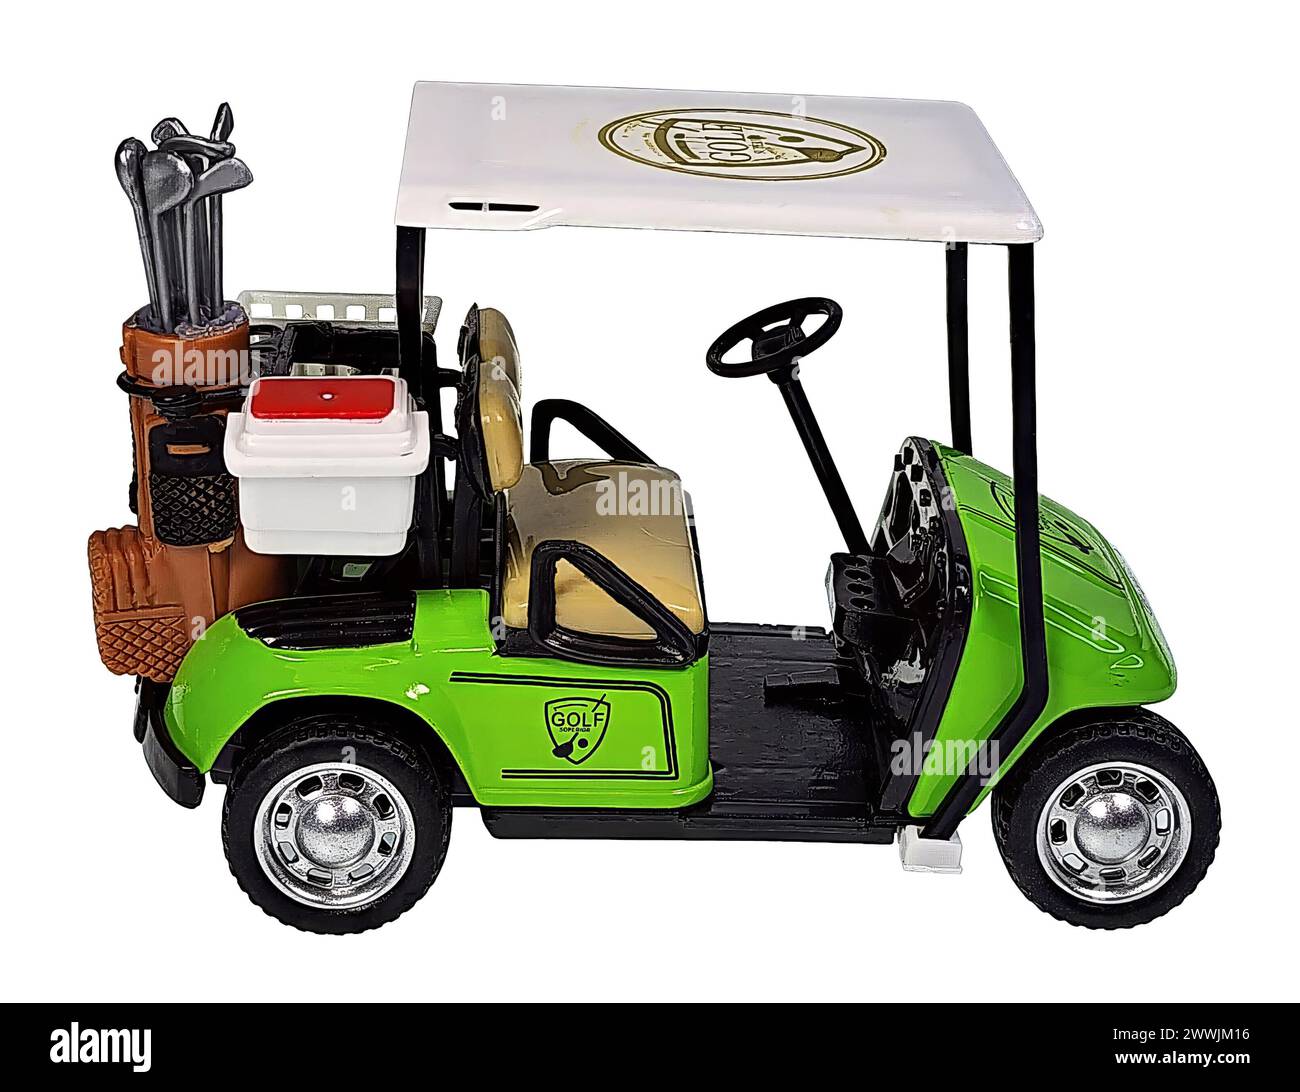 A golf cart used for transportation during a game of golf Stock Photo